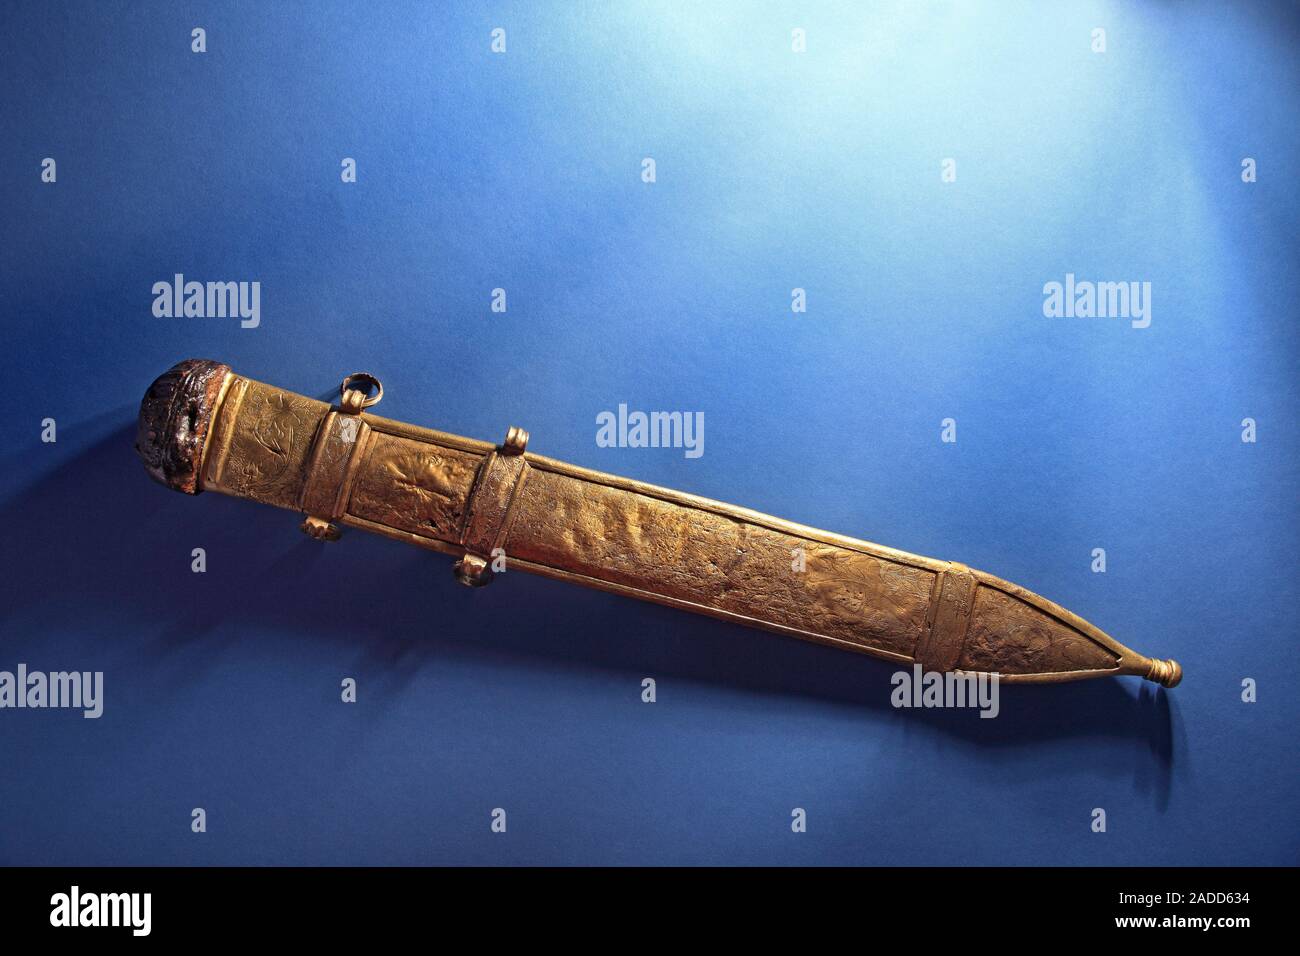 Roman bronze sword. Ancient Roman engraved bronze gladius hispaniensis sword. This artefact was found in the Rhone at Arles, France, and is one of the Stock Photo -